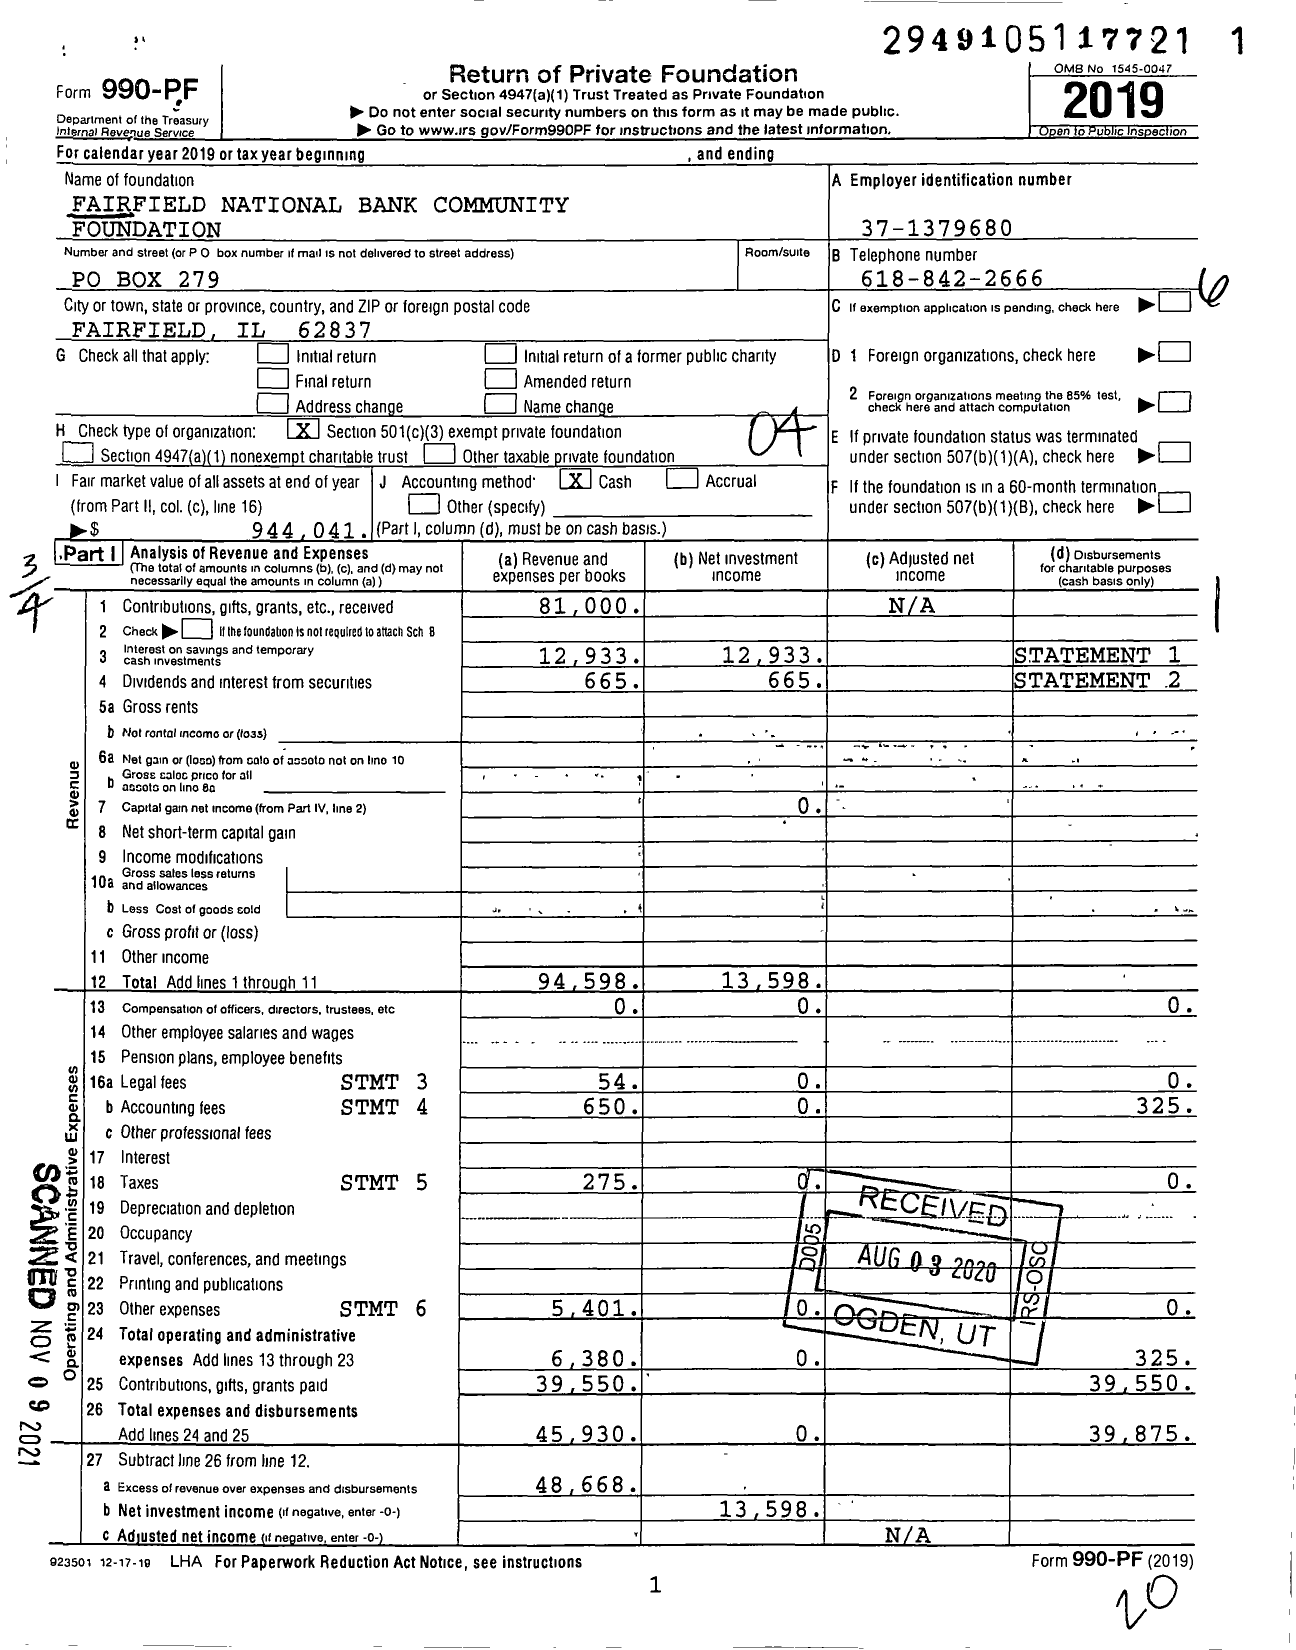 Image of first page of 2019 Form 990PF for Fairfield National Bank Community Foundation